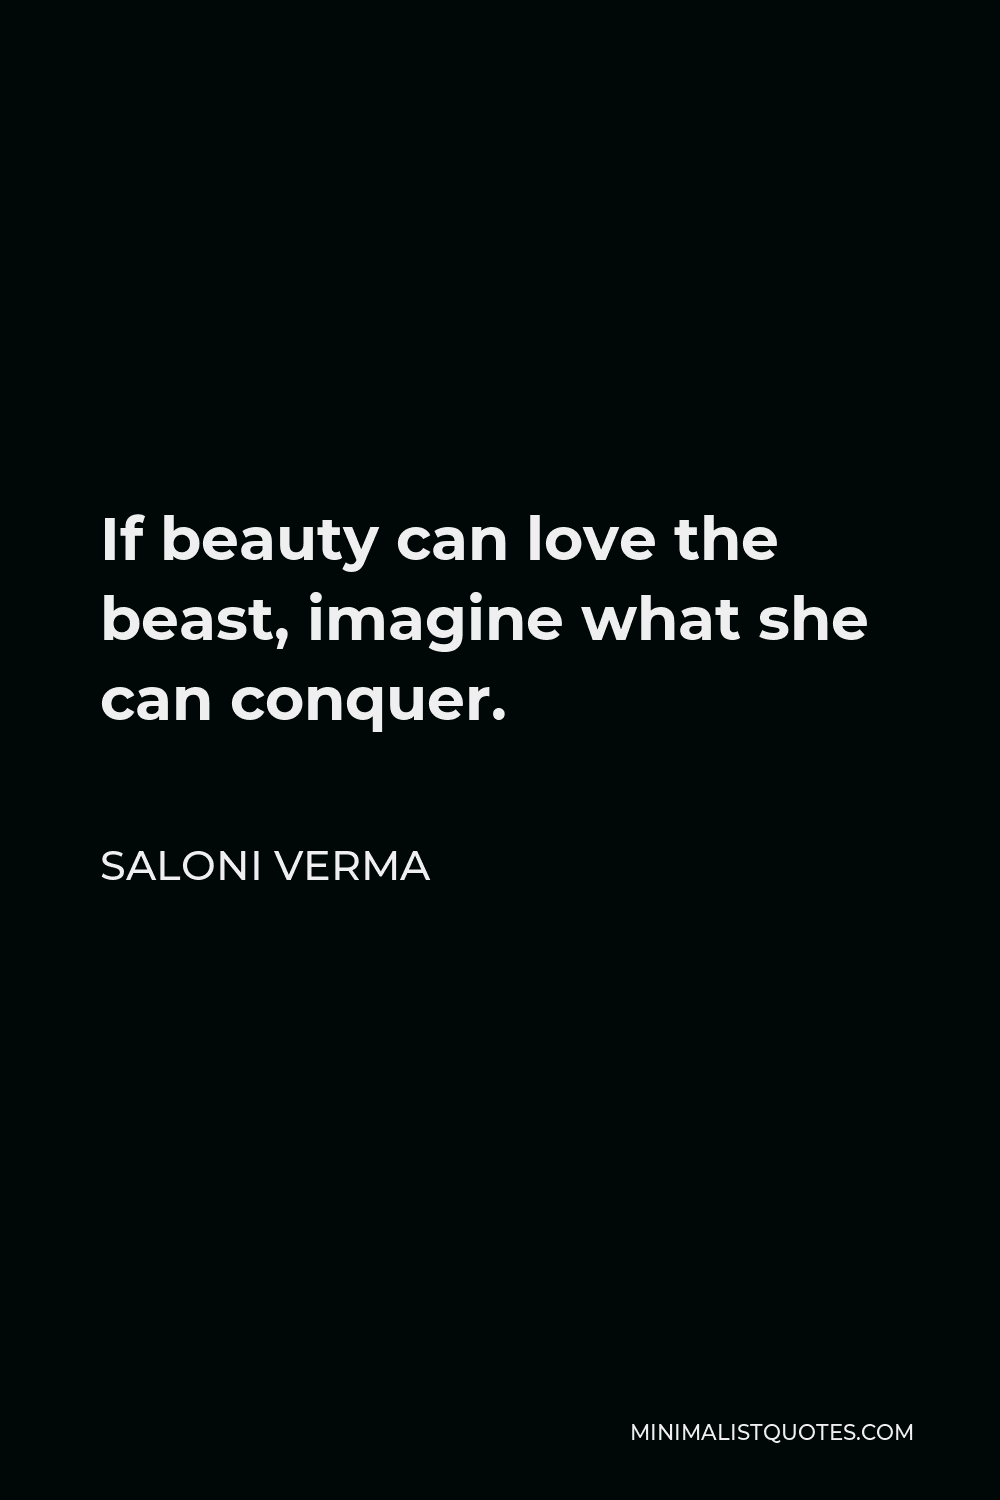 Saloni Verma Quote If Beauty Can Love The Beast Imagine What She Can Conquer